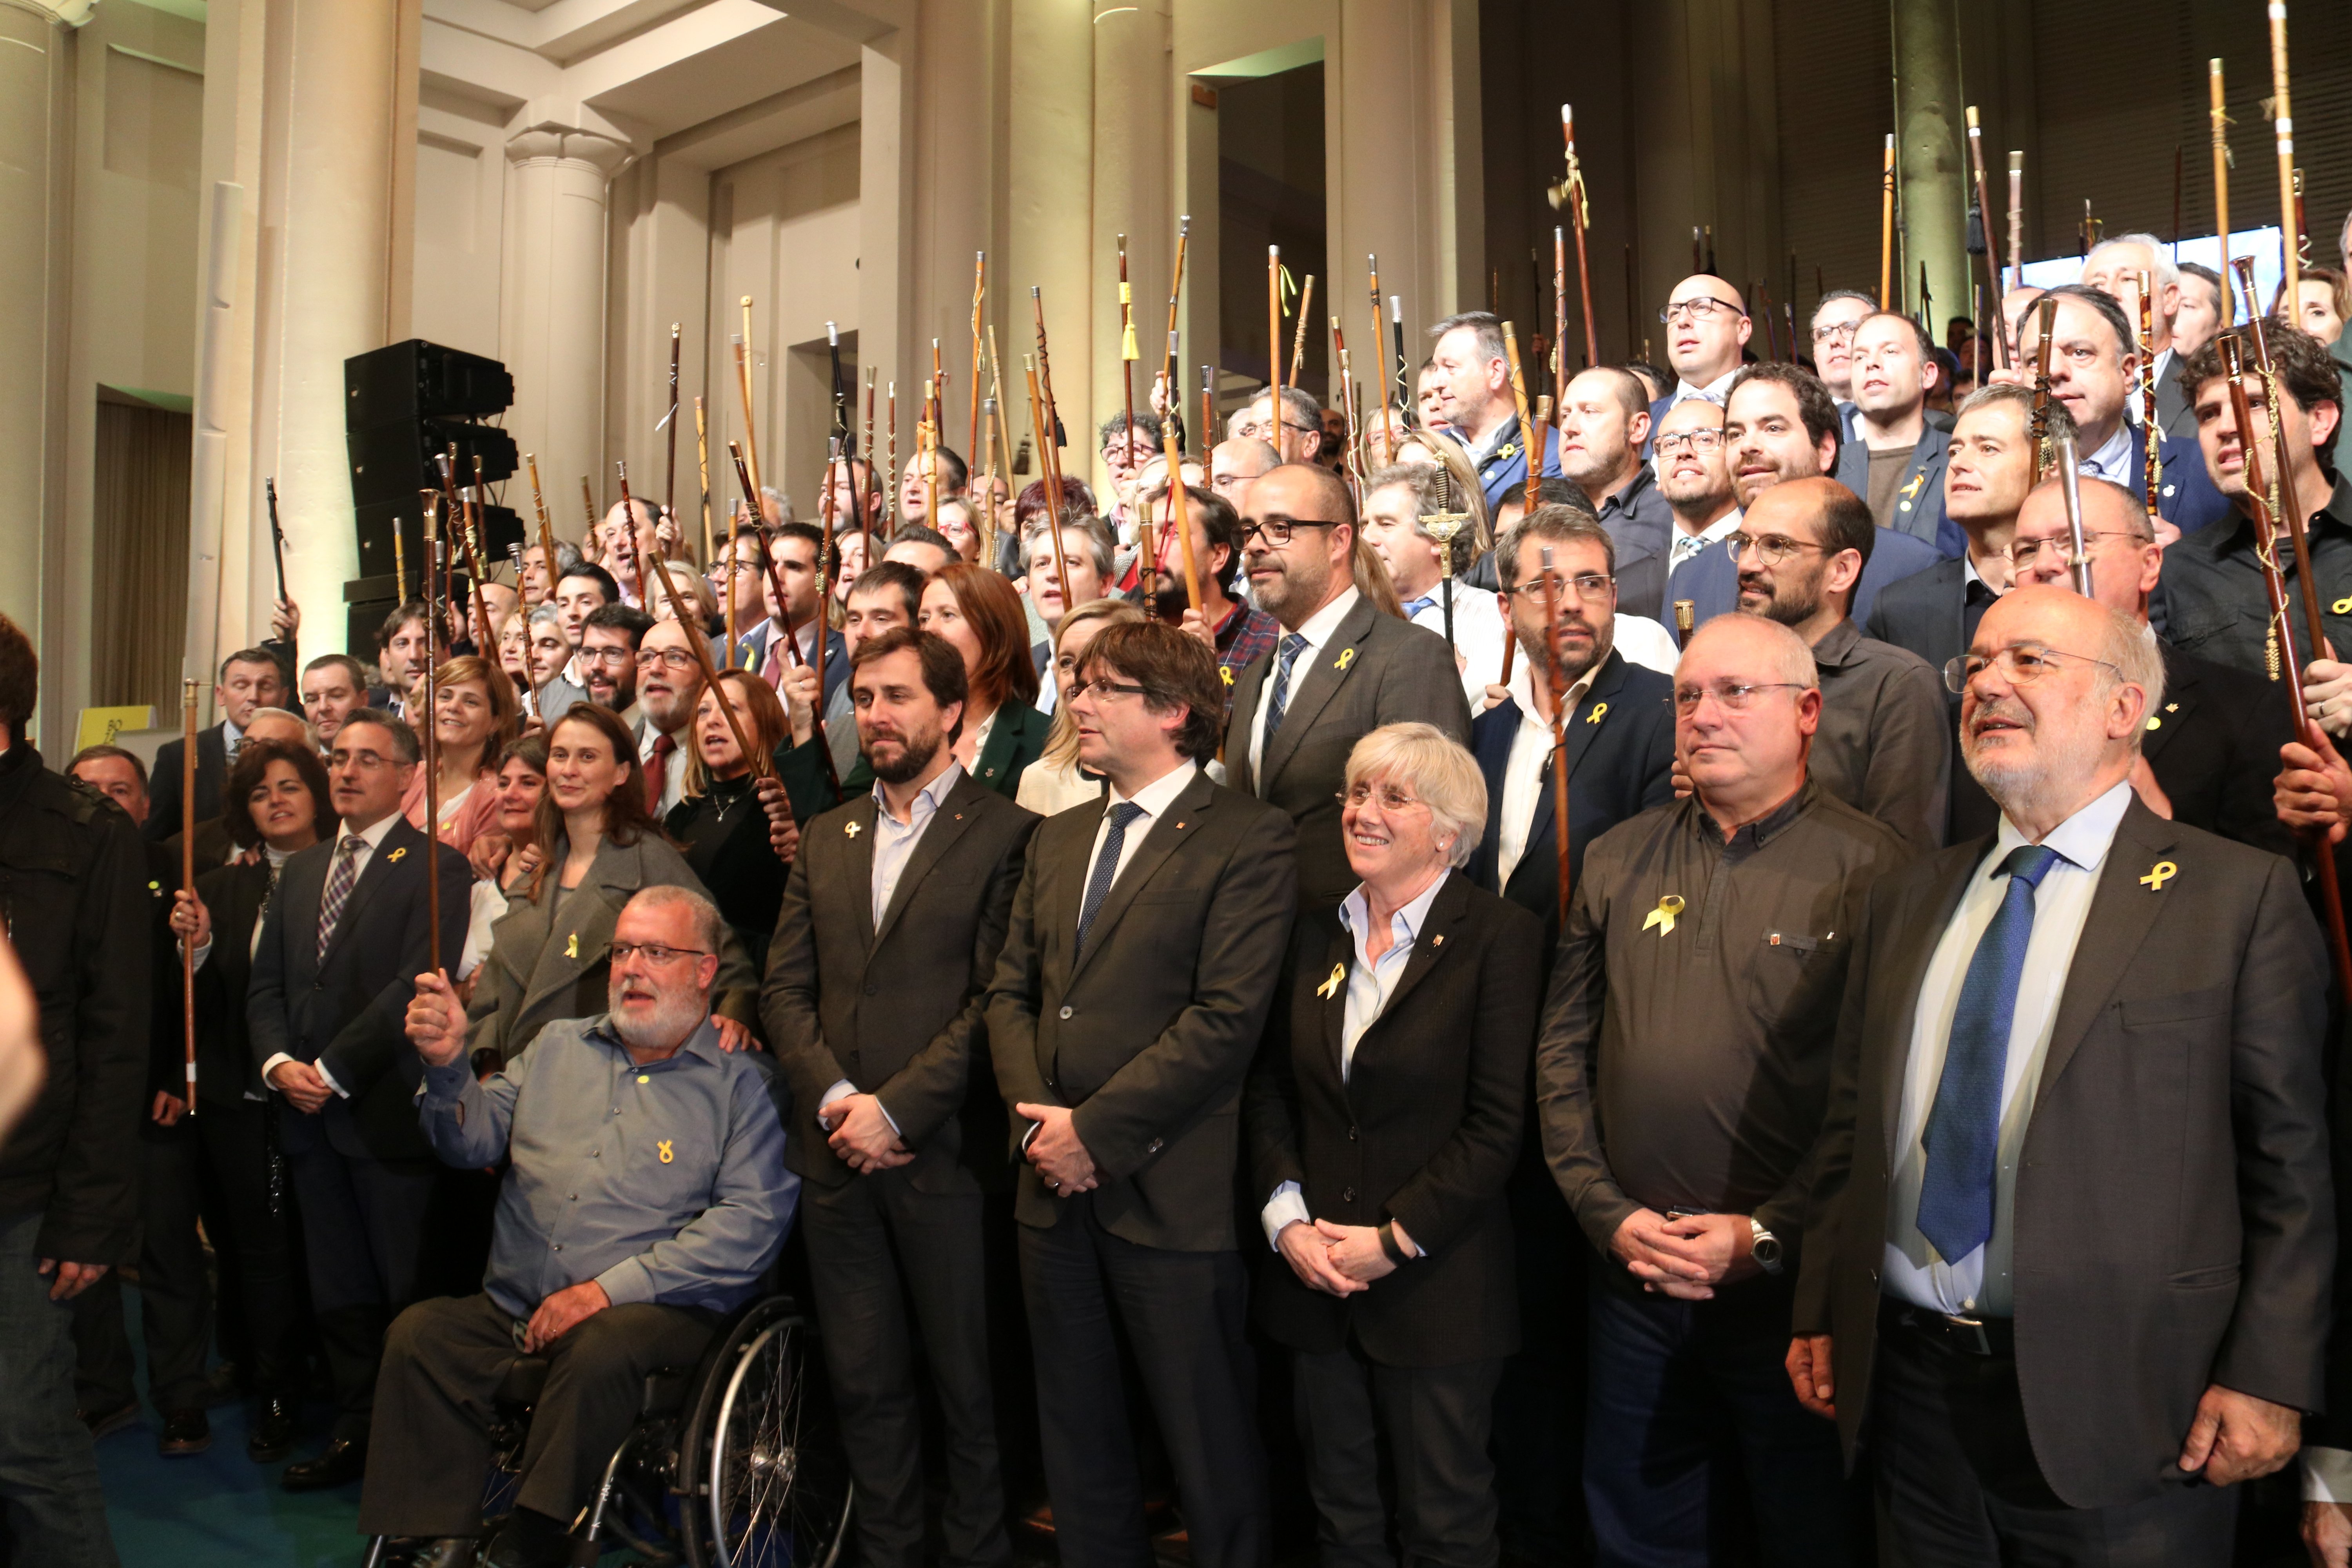 Catalan mayors didn't use public money to travel to Brussels